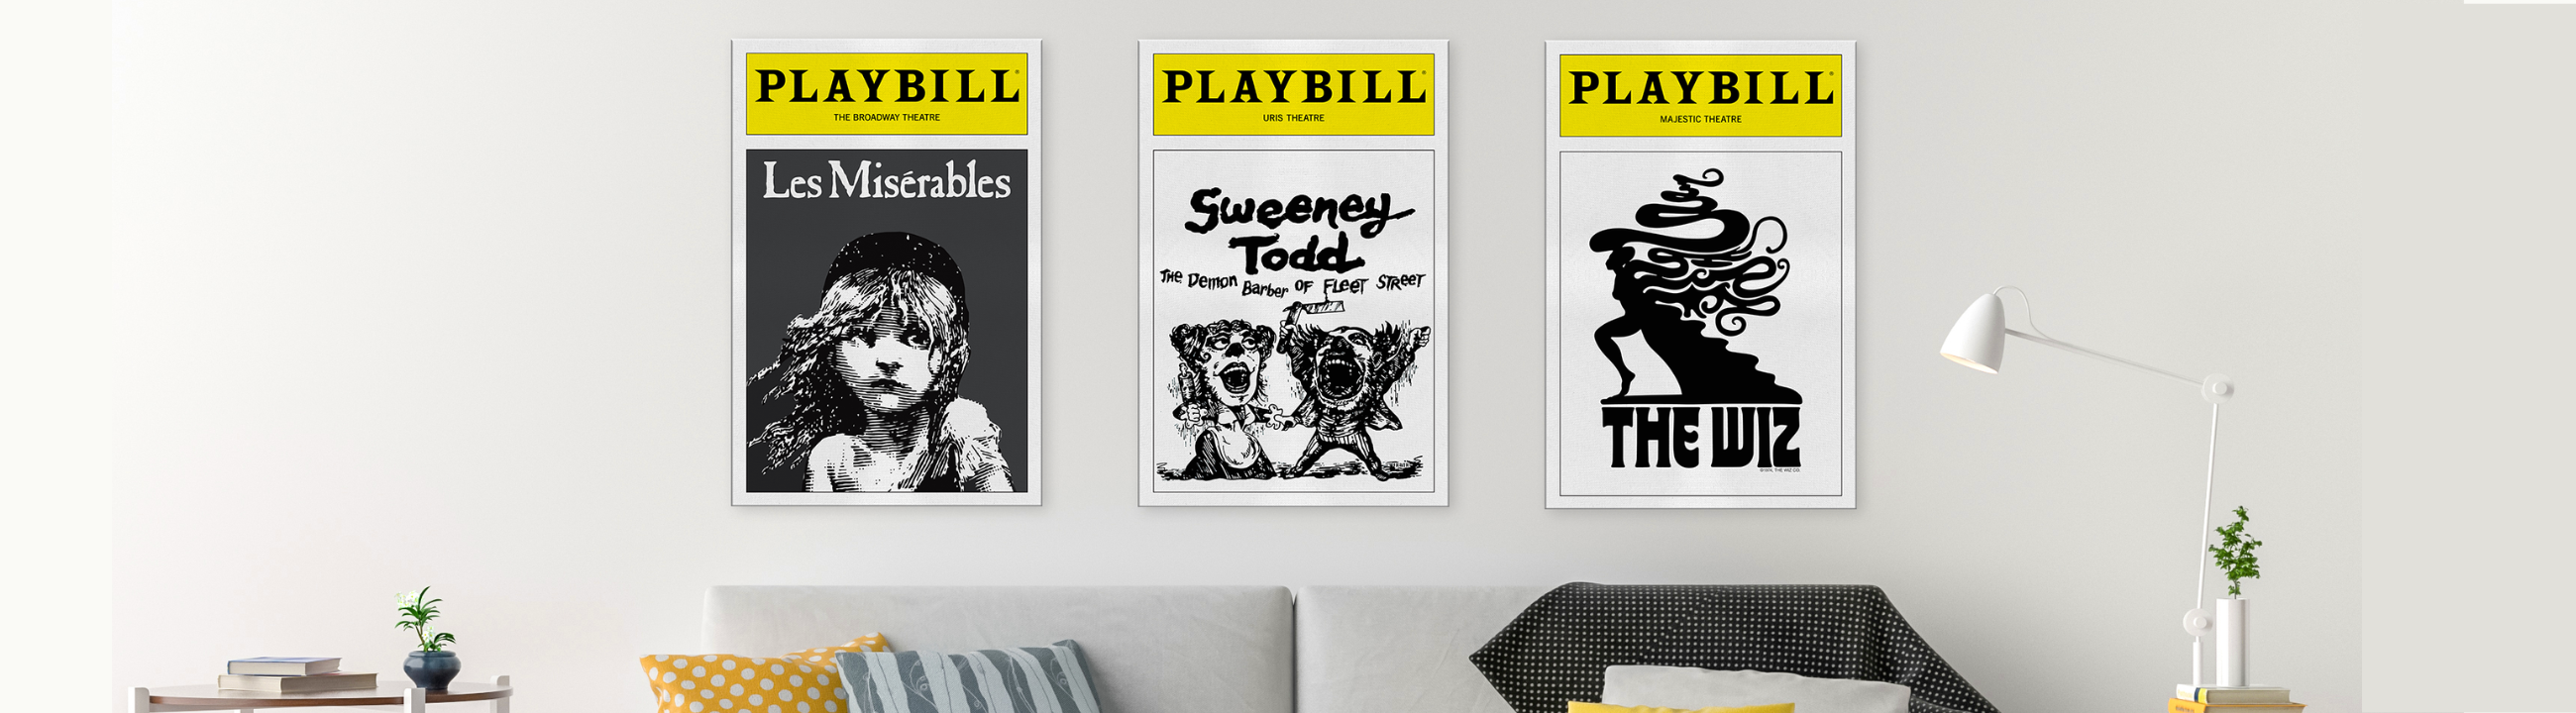 PLAYBILL POSTERS AND WALL ART